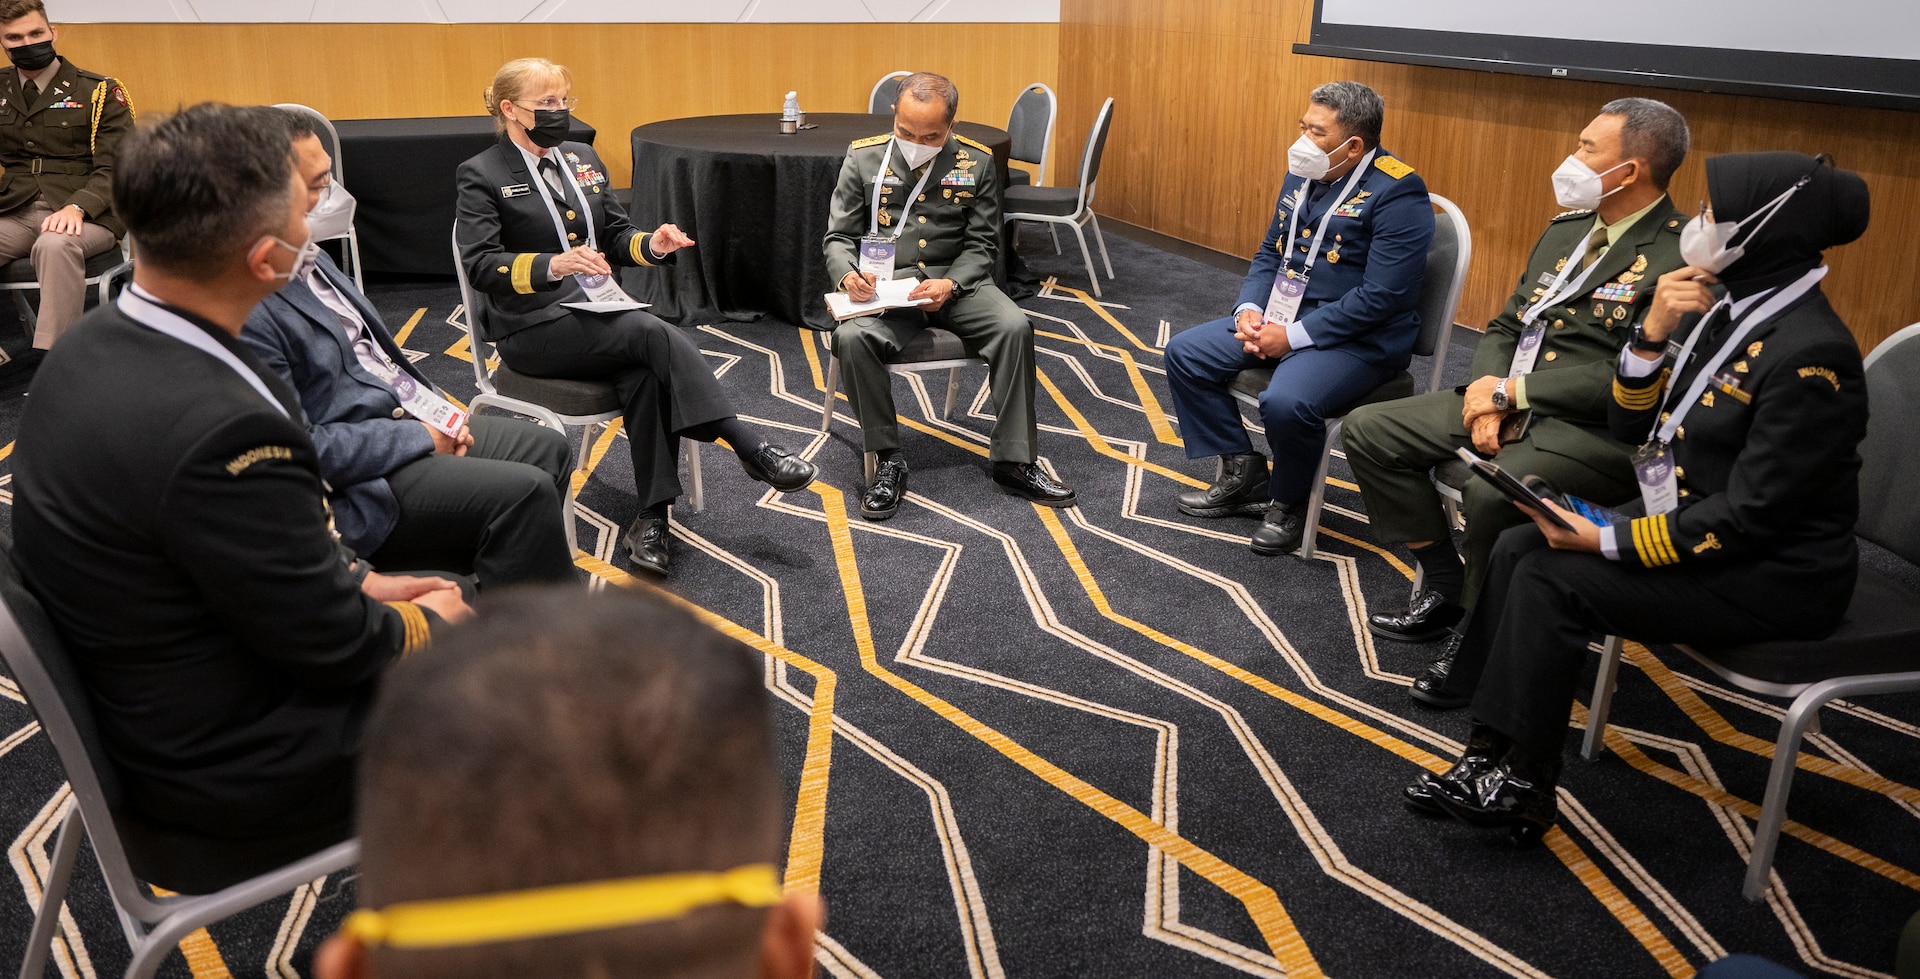 Rear Adm. Pamela Miller, Command Surgeon for U.S. Indo-Pacific Command, speaks with delegates from Indonesia during the second Military-Civilian Health Security Summit June 27, 2022, in Singapore. The summit, held June 27-28, focused on regional approaches to global health security through interagency cooperation with allies and partners.